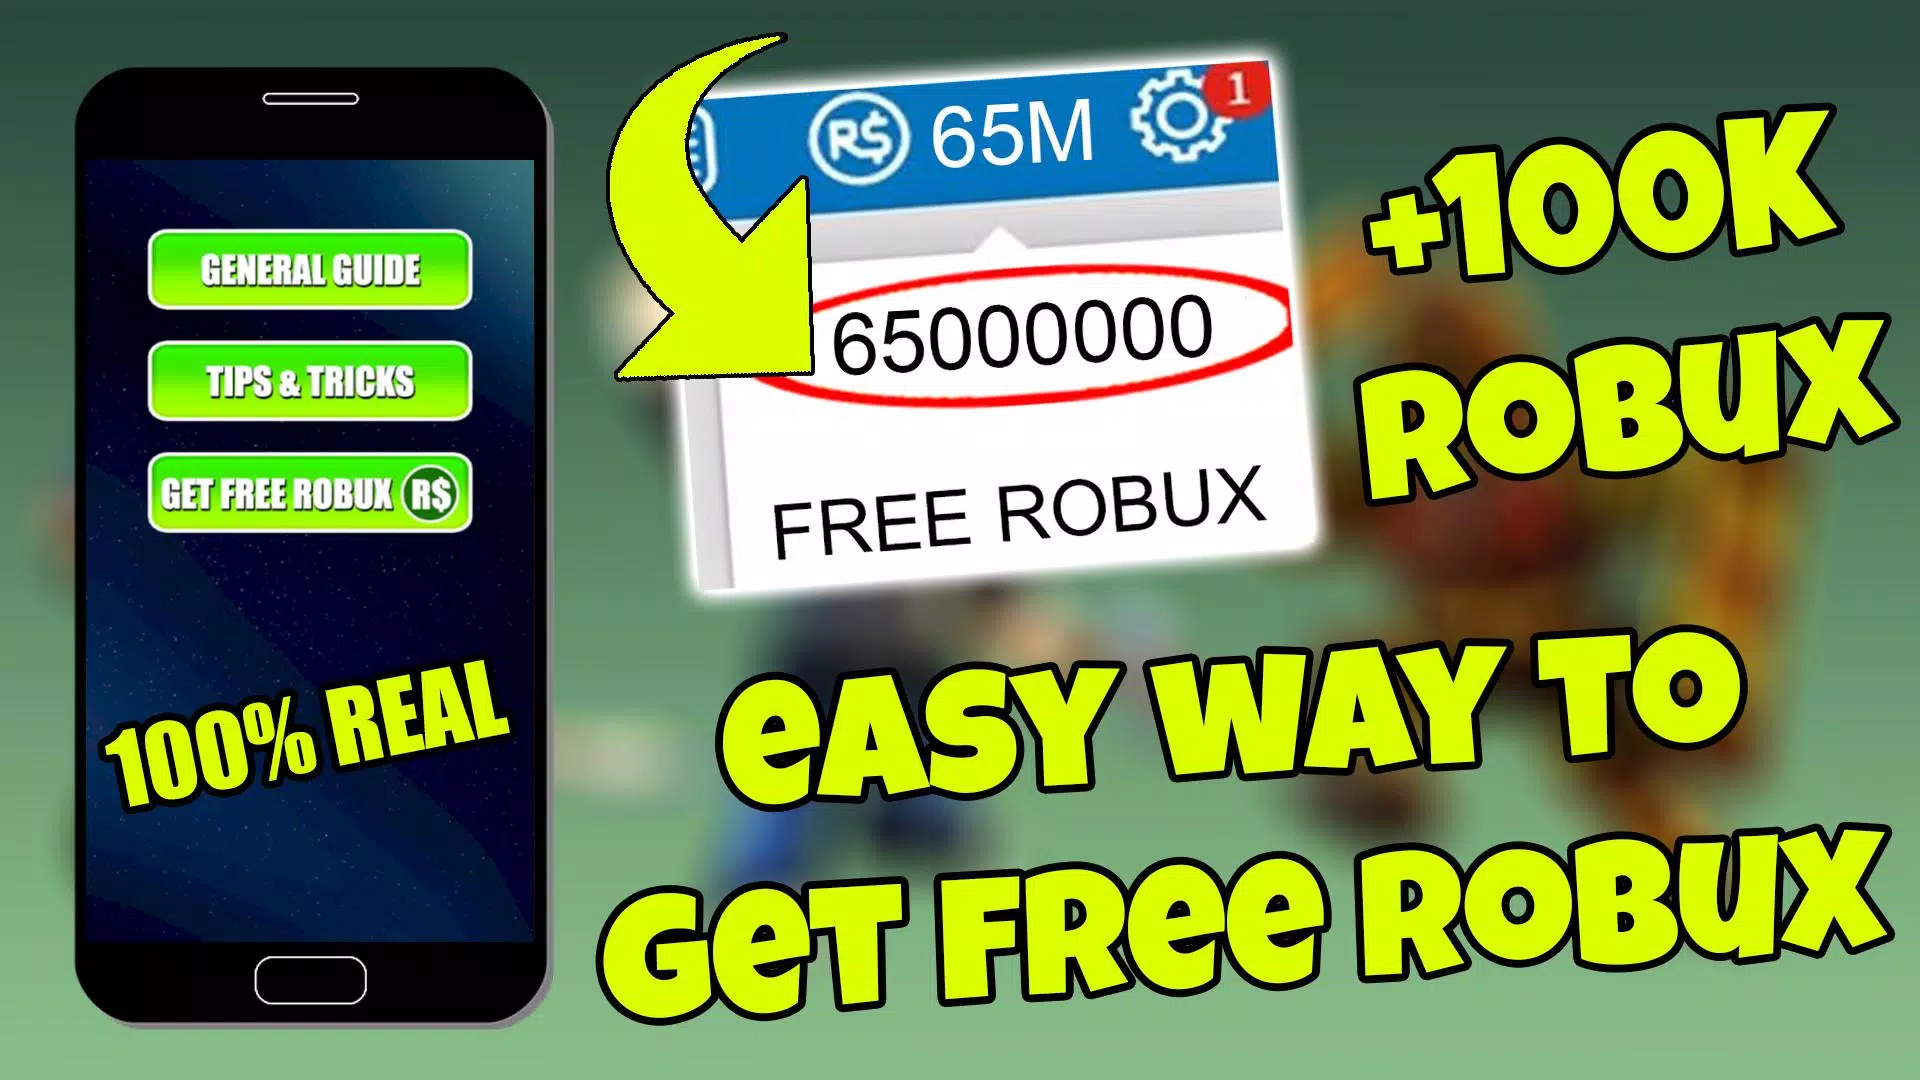 Win Robux For Roblox Free Guide APK for Android Download